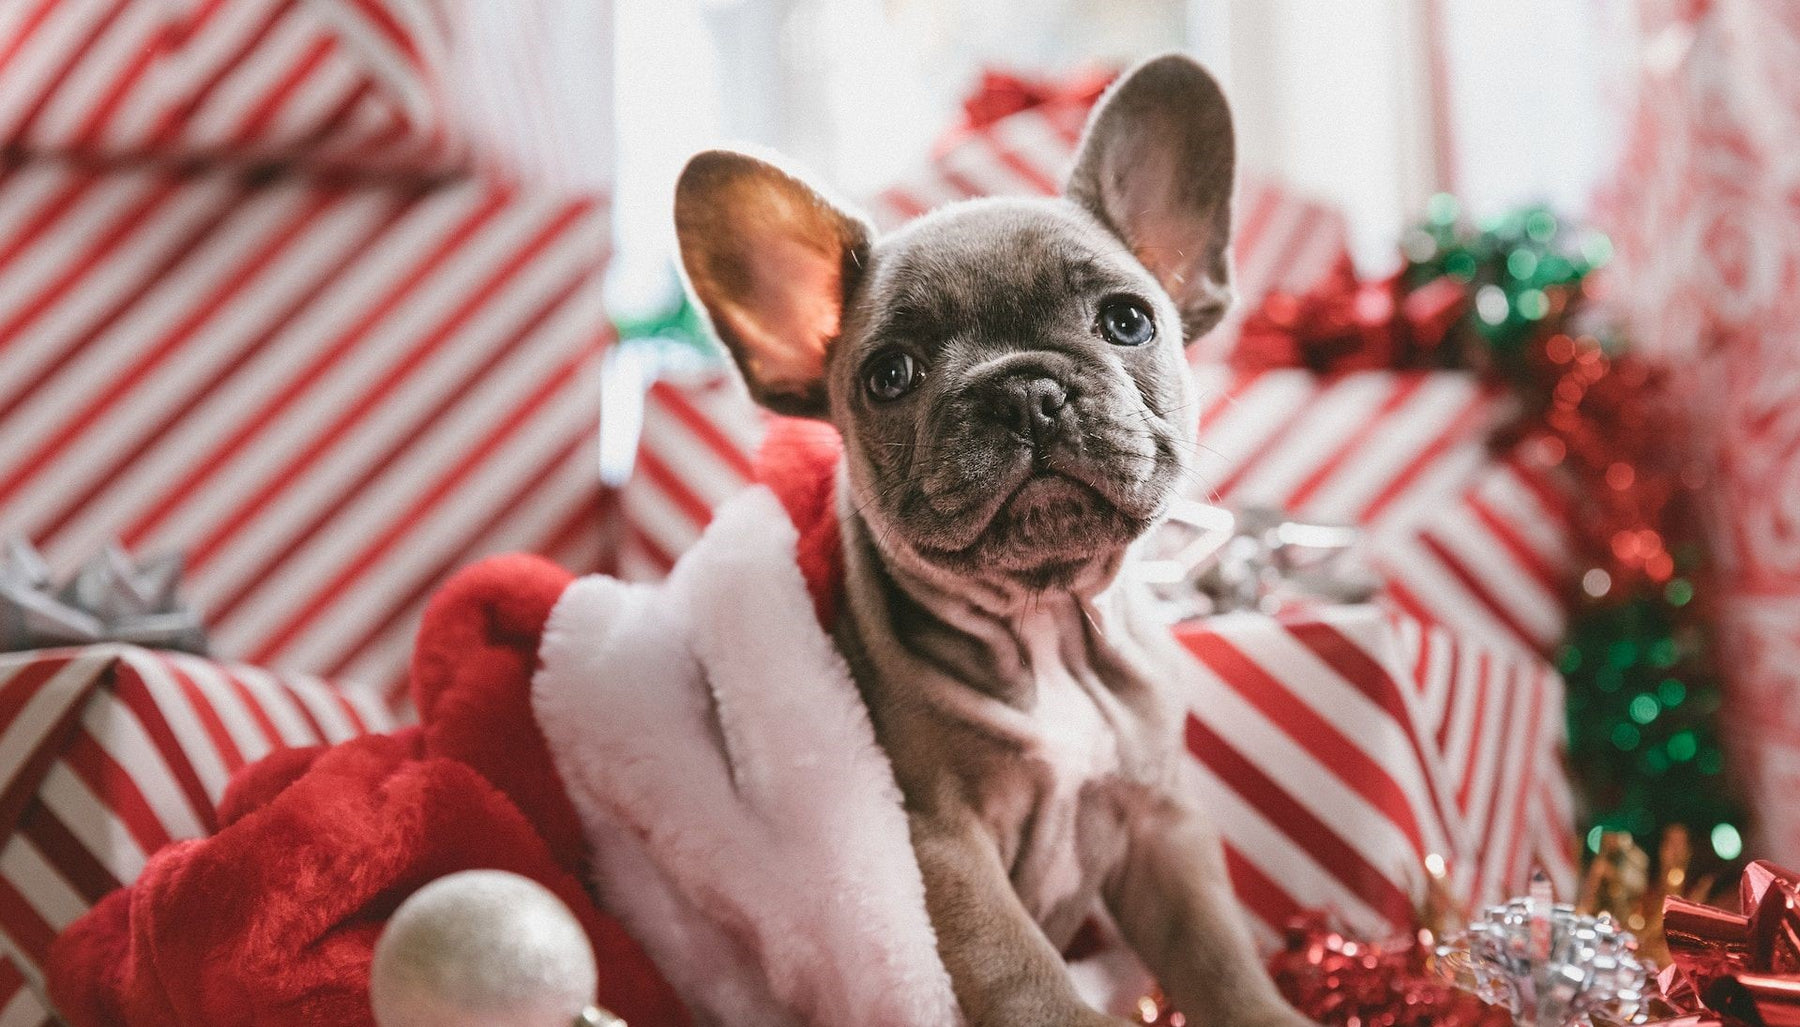 The Puppy Lover's Gift Guide: 32 Gift Ideas For Dog Owners